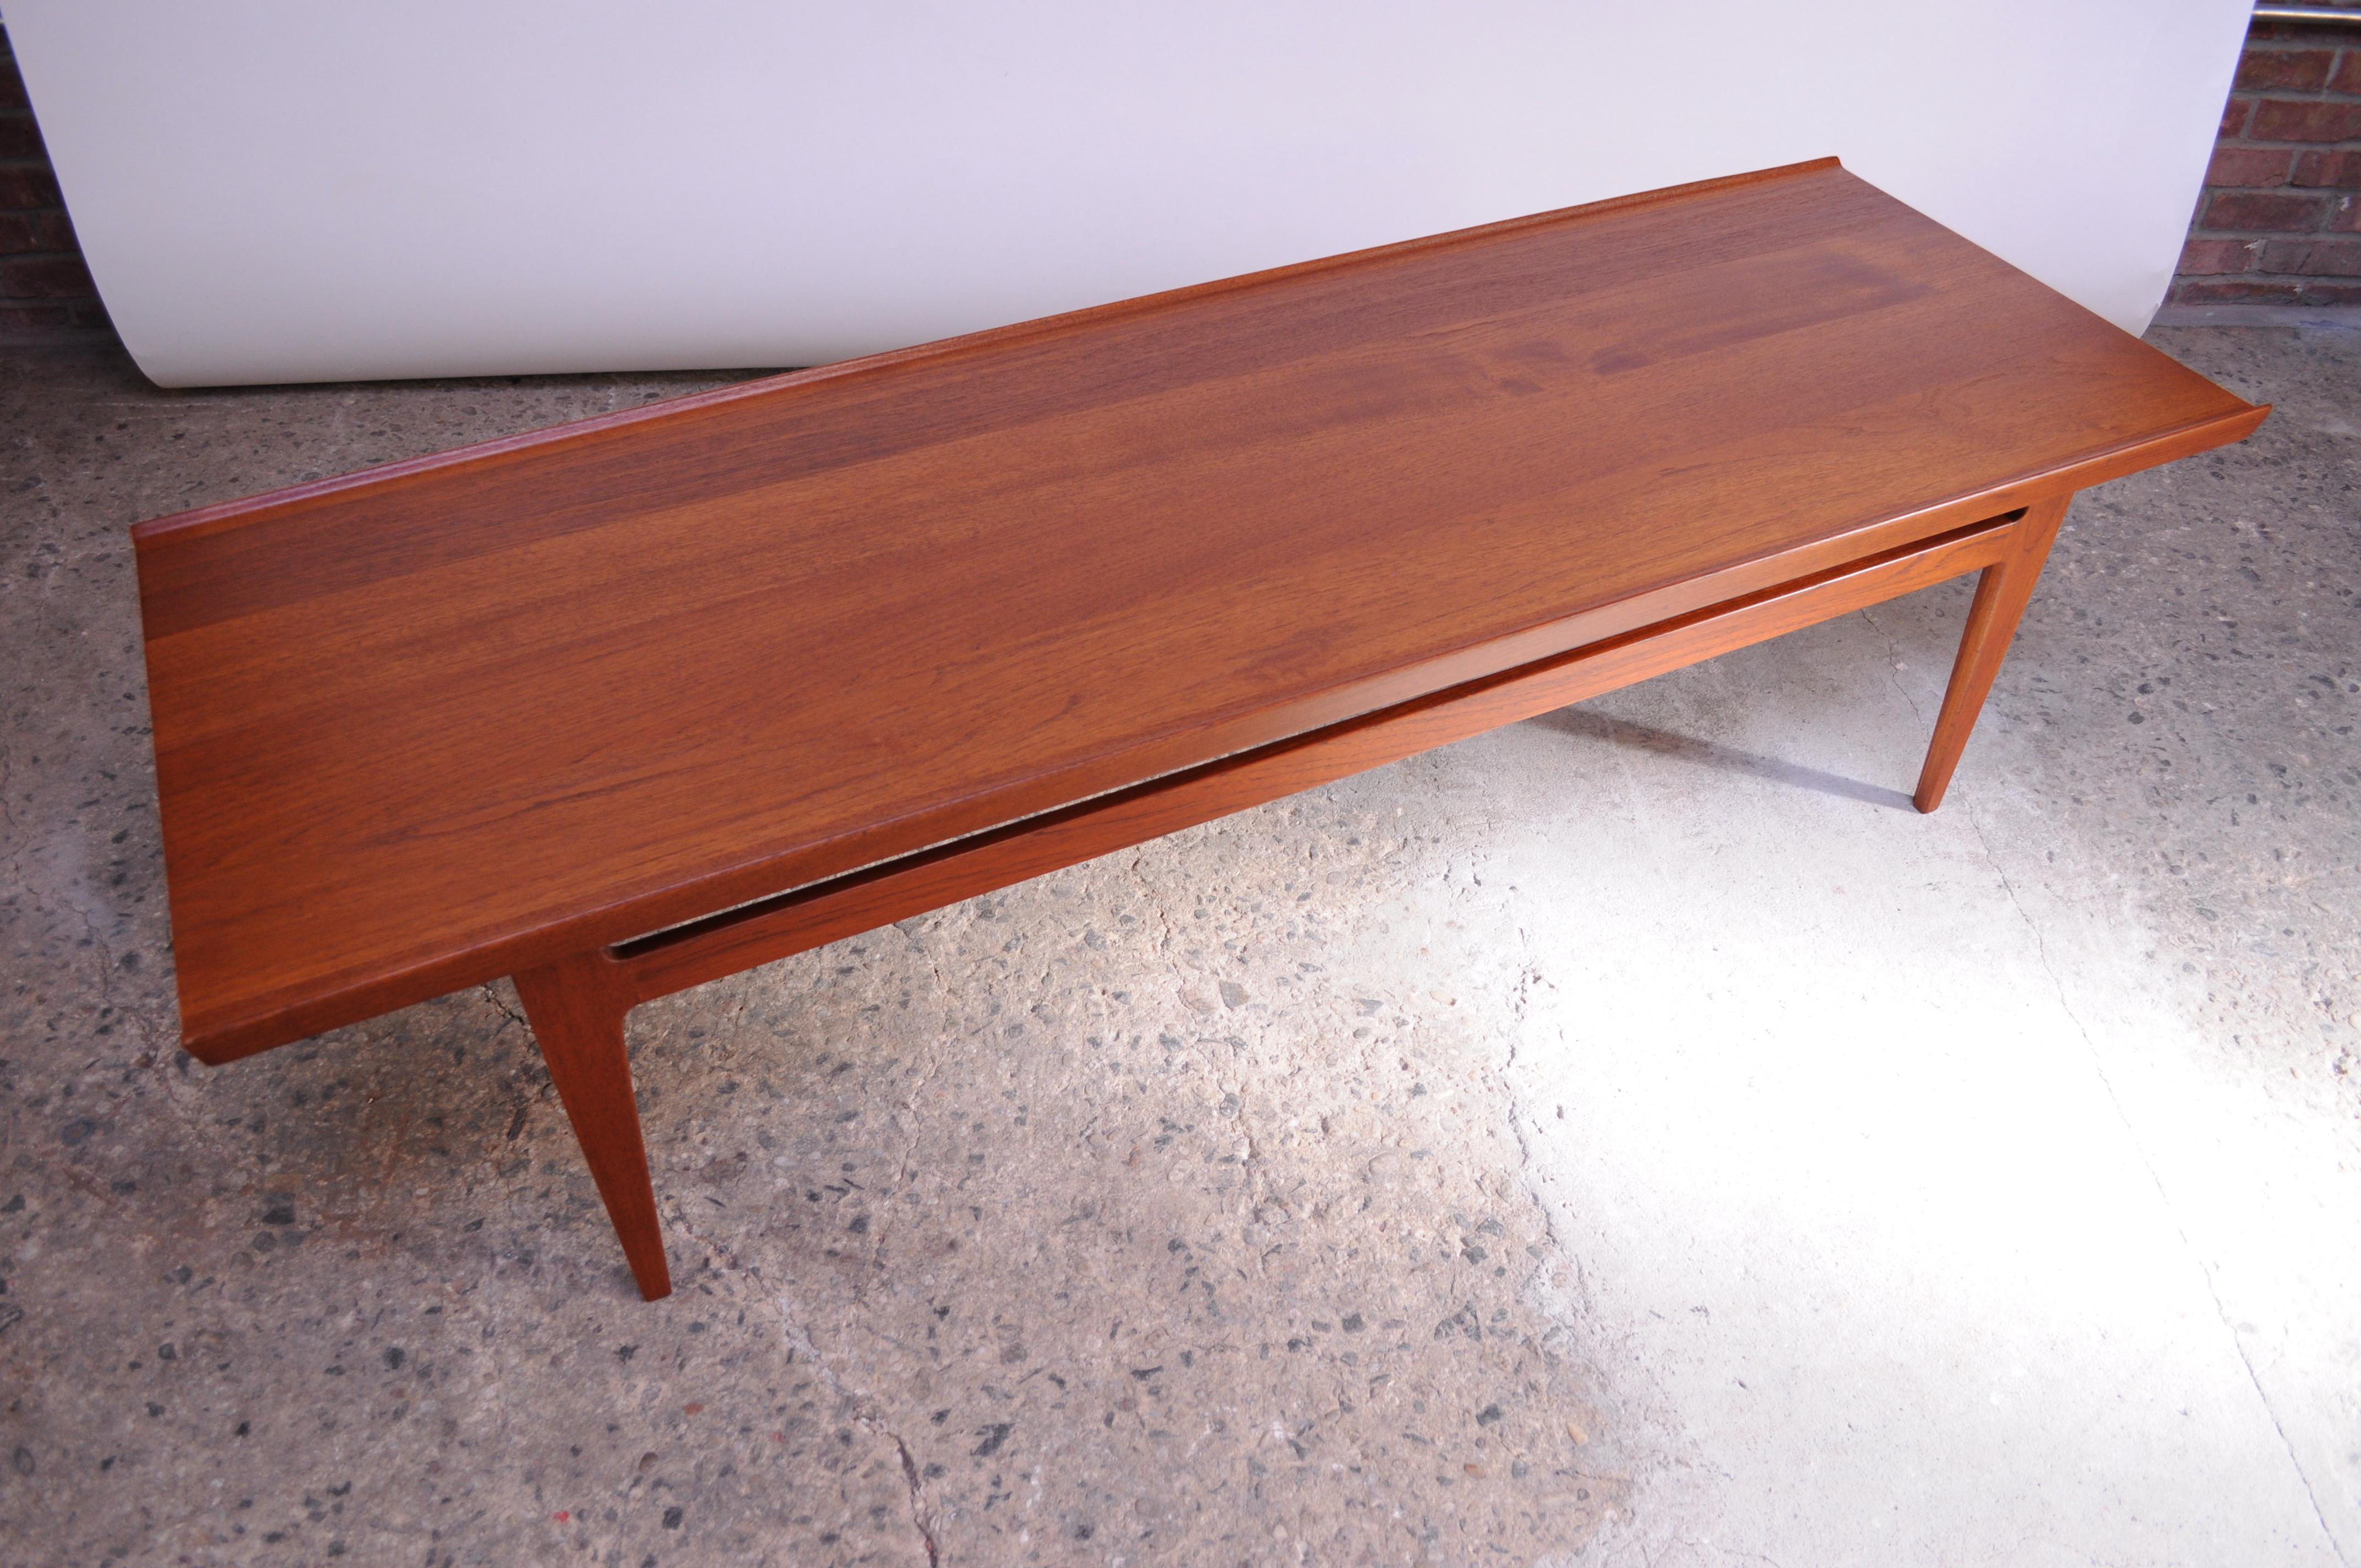 Model # 532 rectangular coffee table designed by Finn Juhl and produced by France & Son (circa 1959). Sculpted from solid teak featuring lipped edges and unique, tapered legs. Conservatively refinished and in excellent, vintage condition. 
Retains